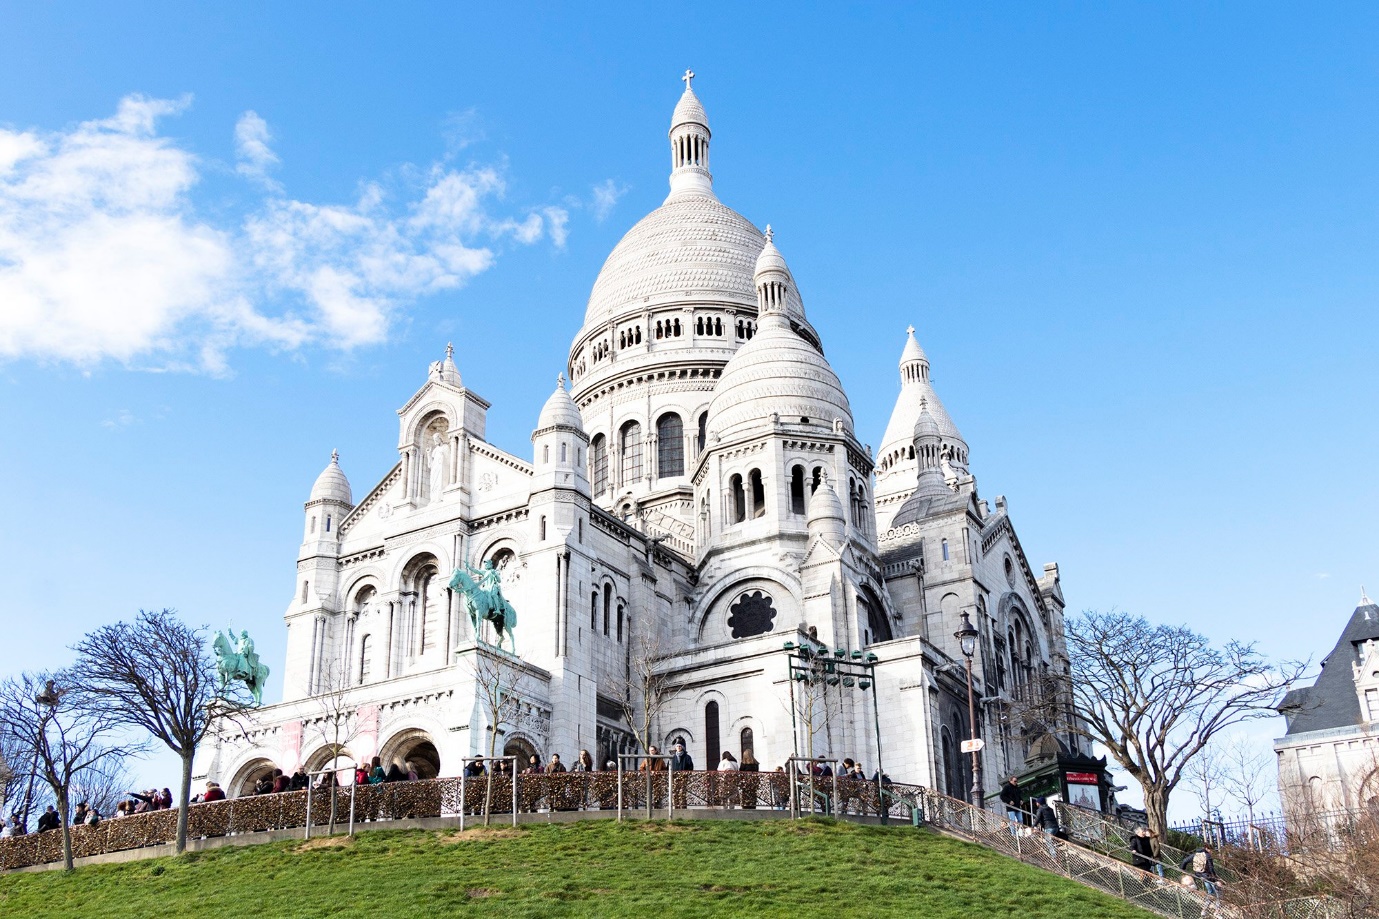 outside view of the Montmartre in Paris, France | Wedifys